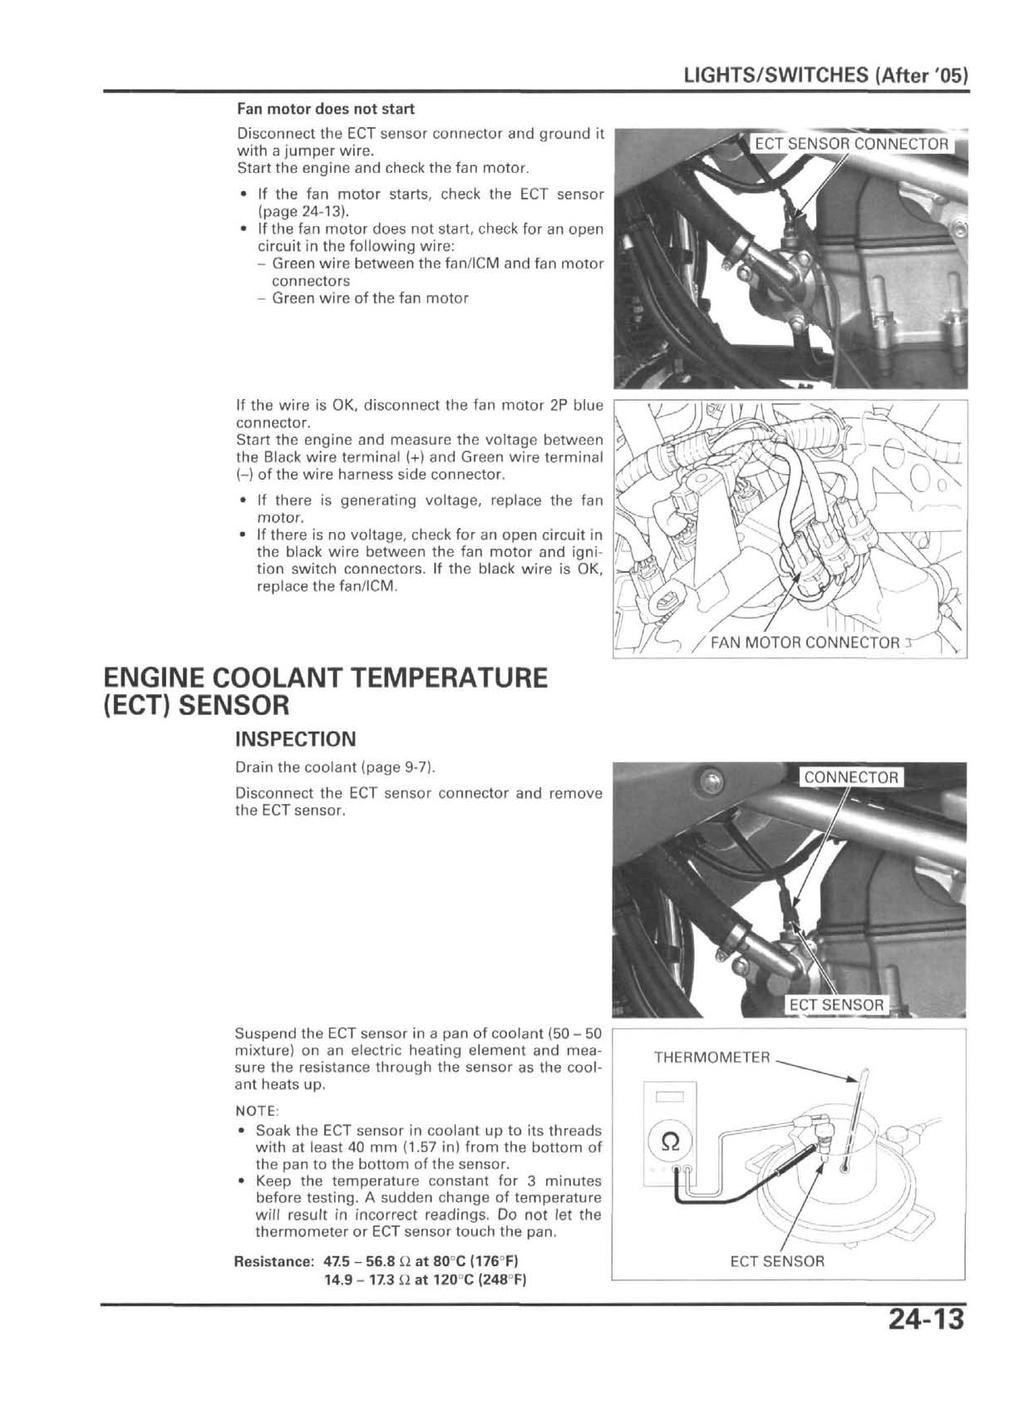 Fan motor does not start Disconnect the ECT sensor connector and ground it with a jumper wire. Start the engine and check the fan motor. If the fan motor starts, check the ECT sensor (page 24-13).